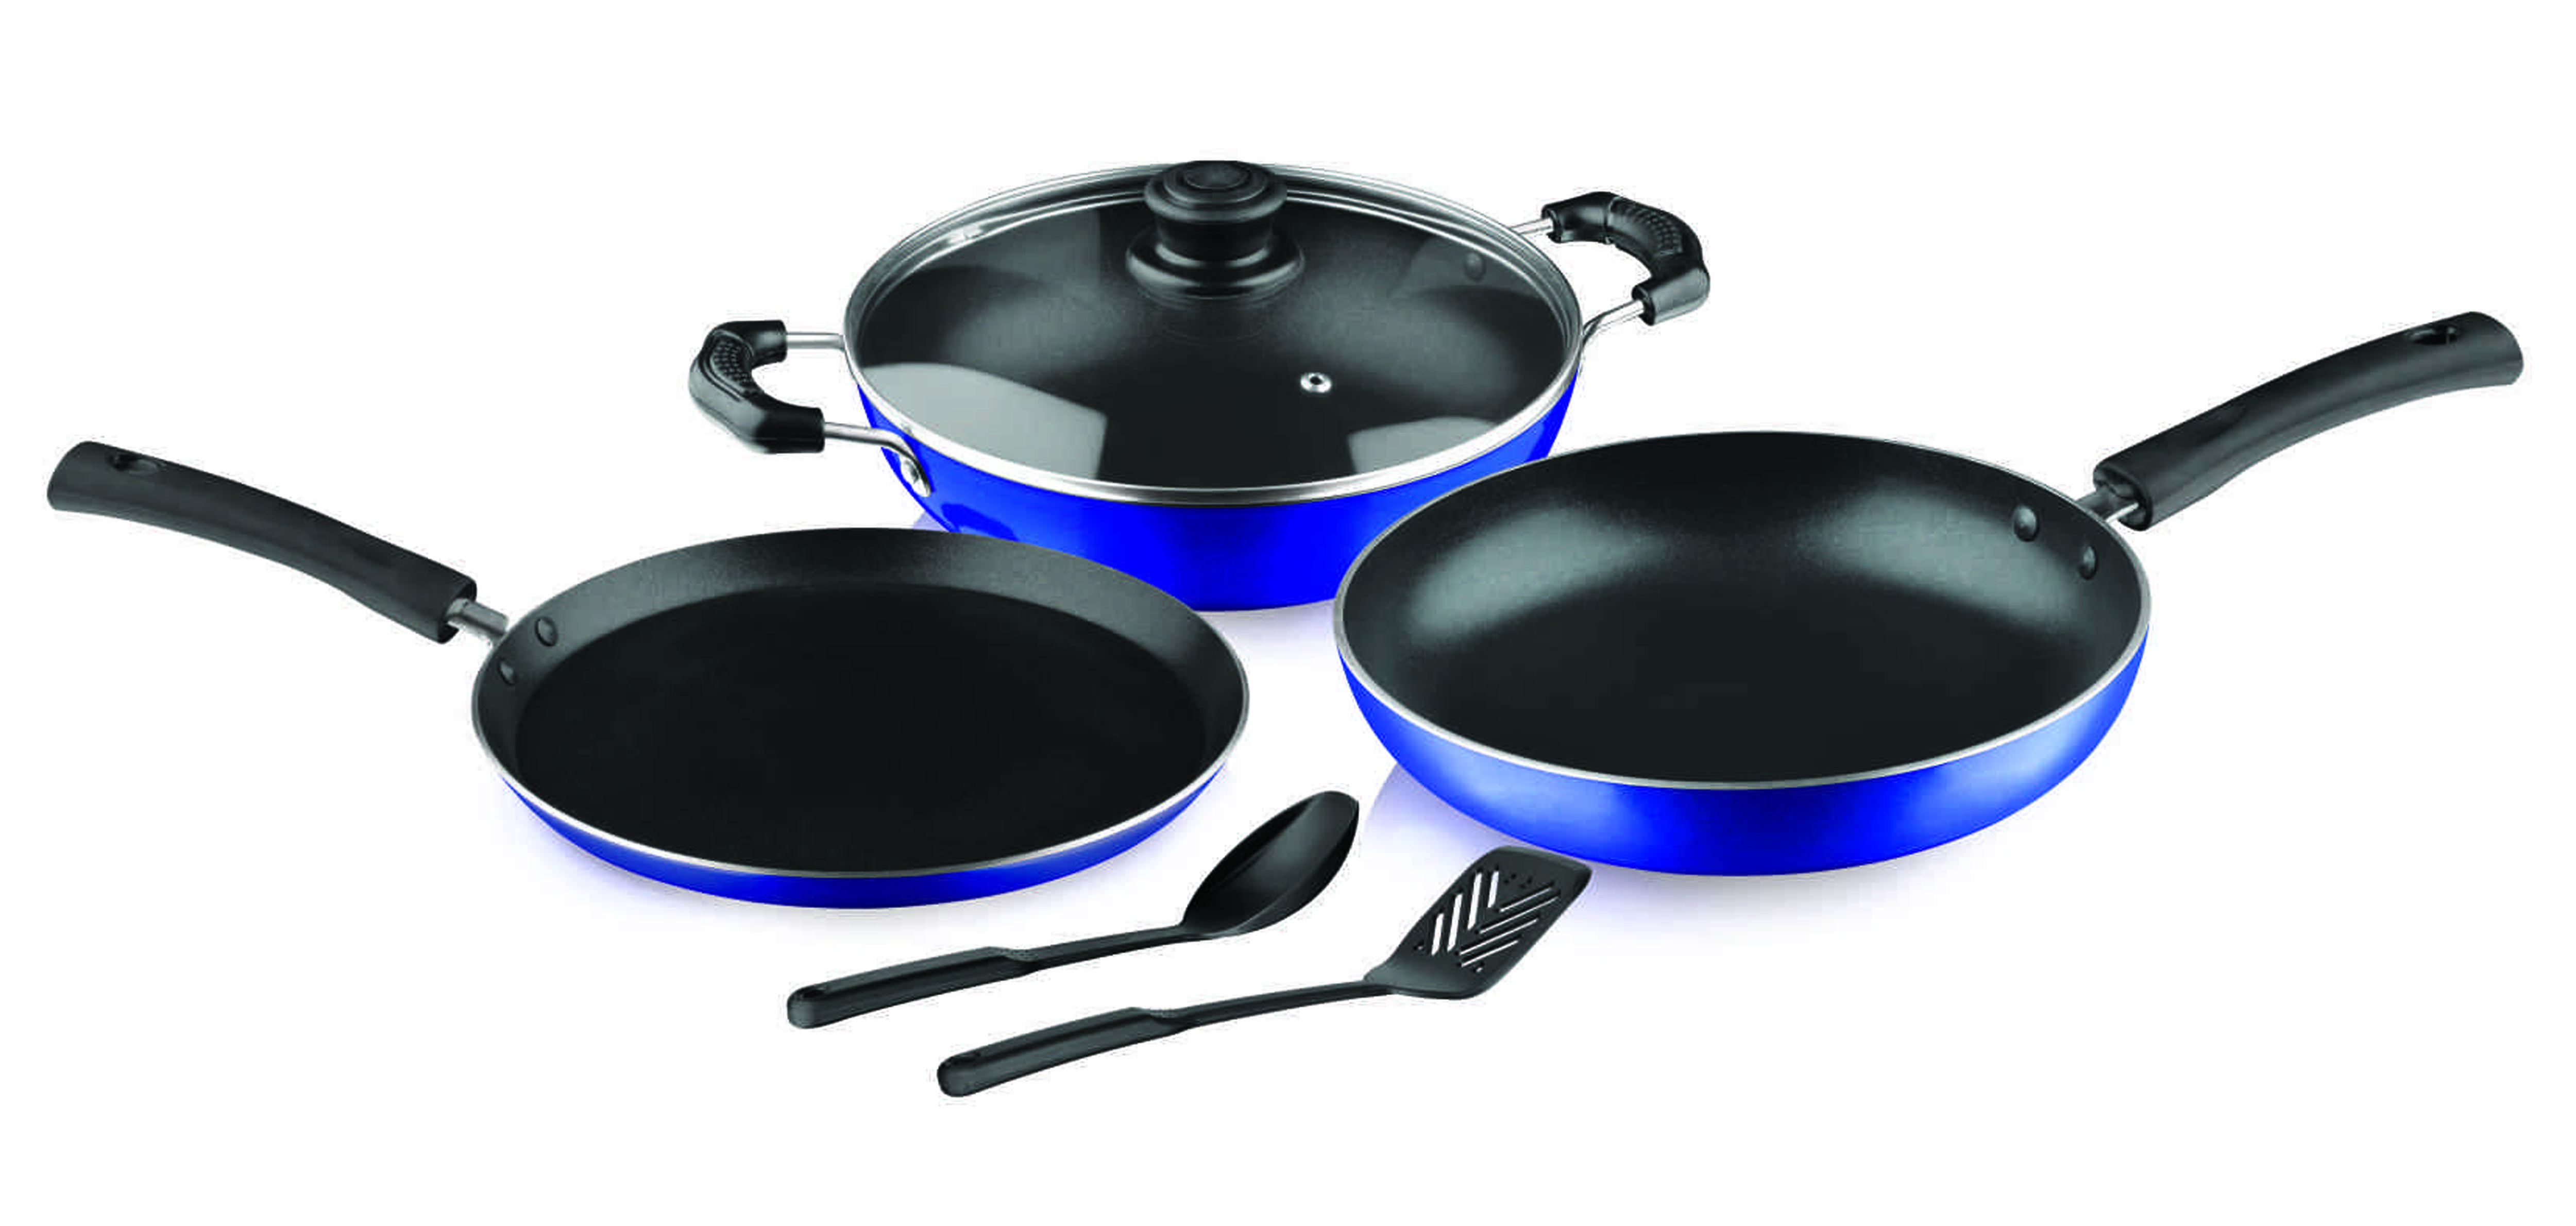 Nirlon Non Stick Coated Aluminium Kitchenware Gift Set of 6 Pieces, Cooking Pan and Pot Utensils